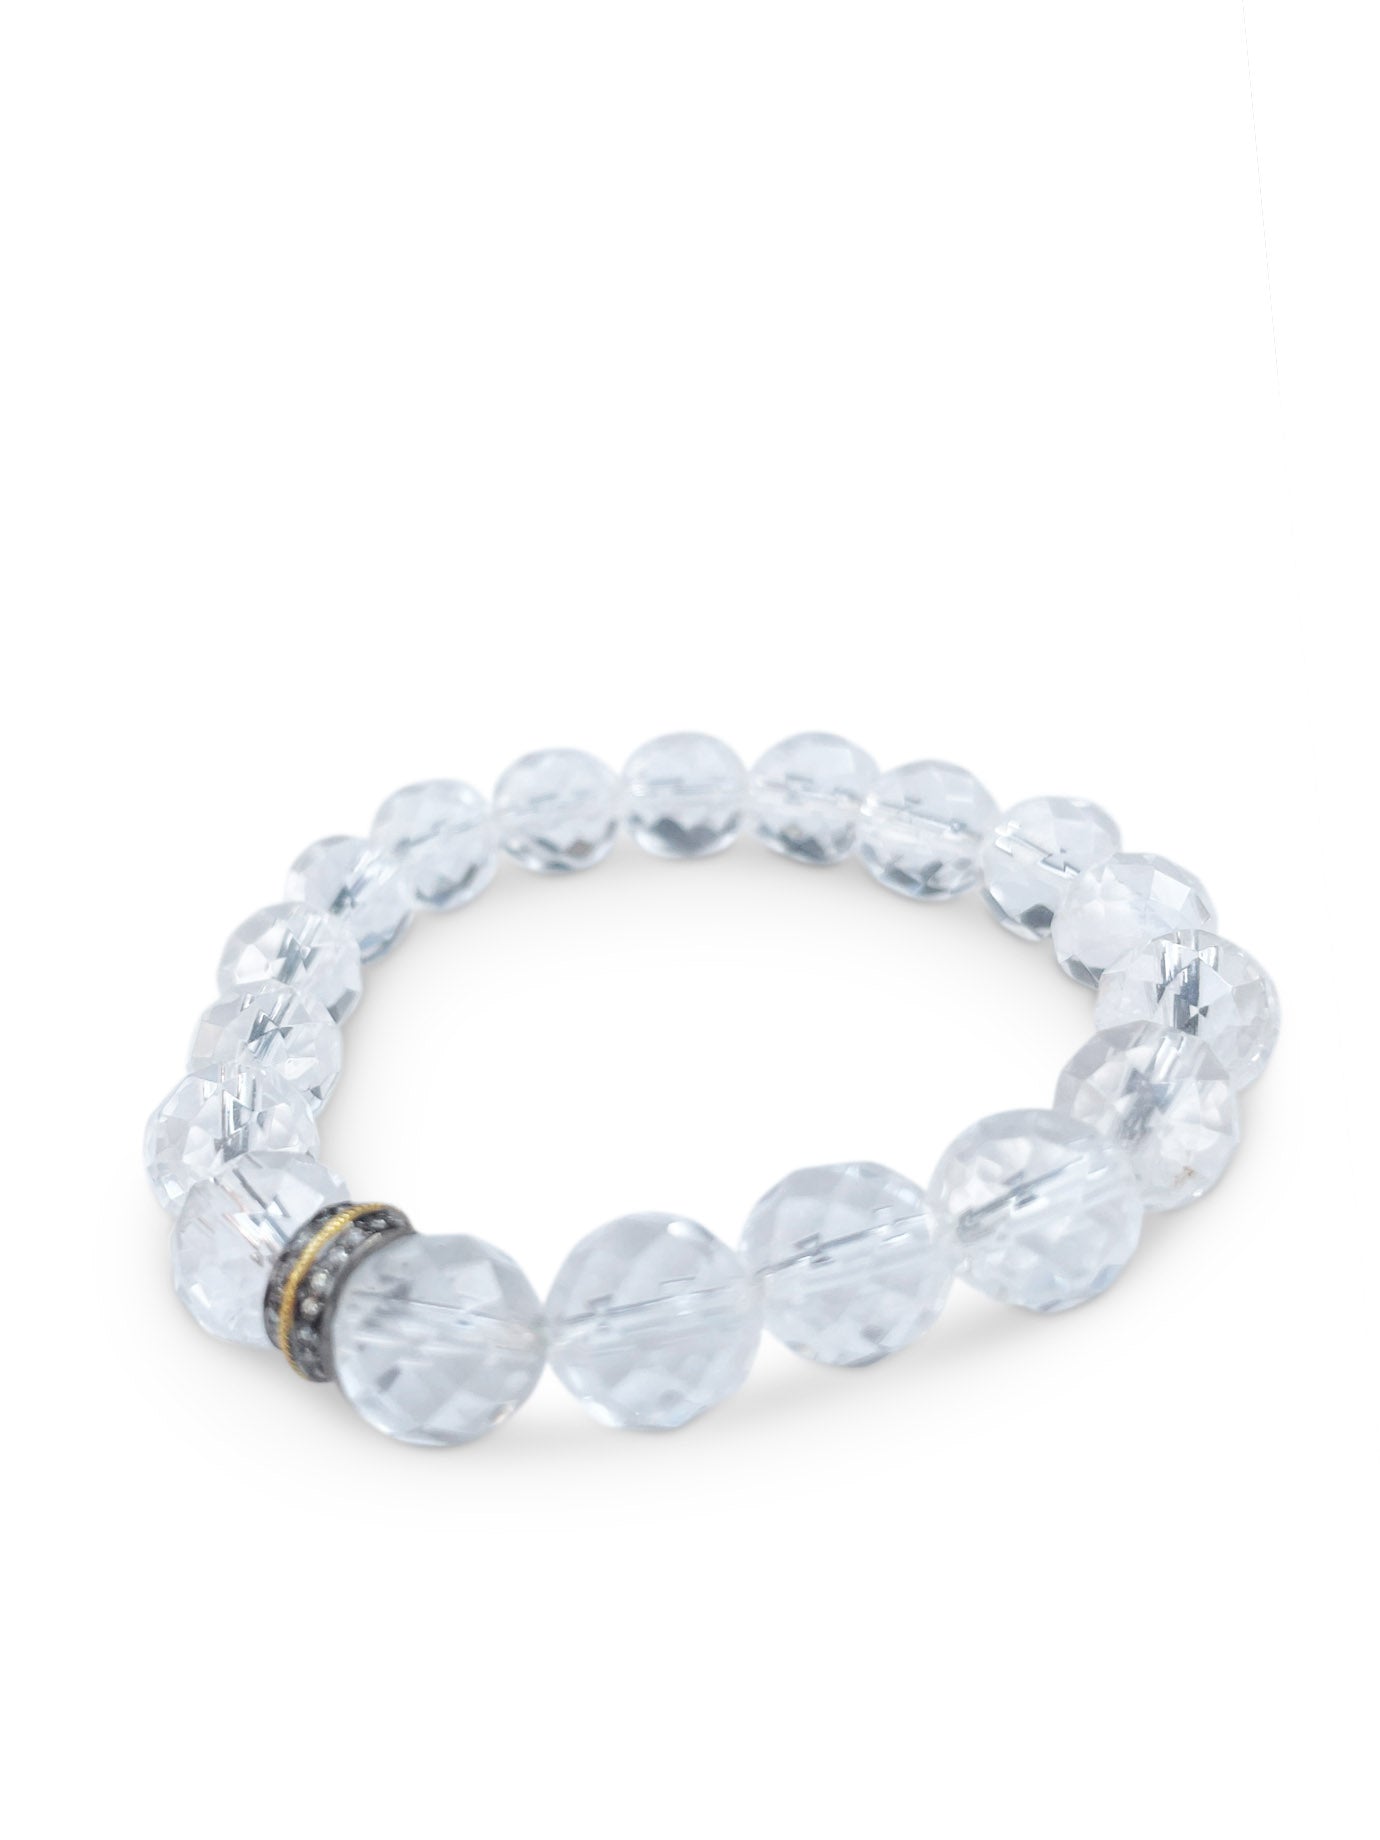 Faceted Clear Crystal Quartz with Pave Diamond Mixed Metal Bead